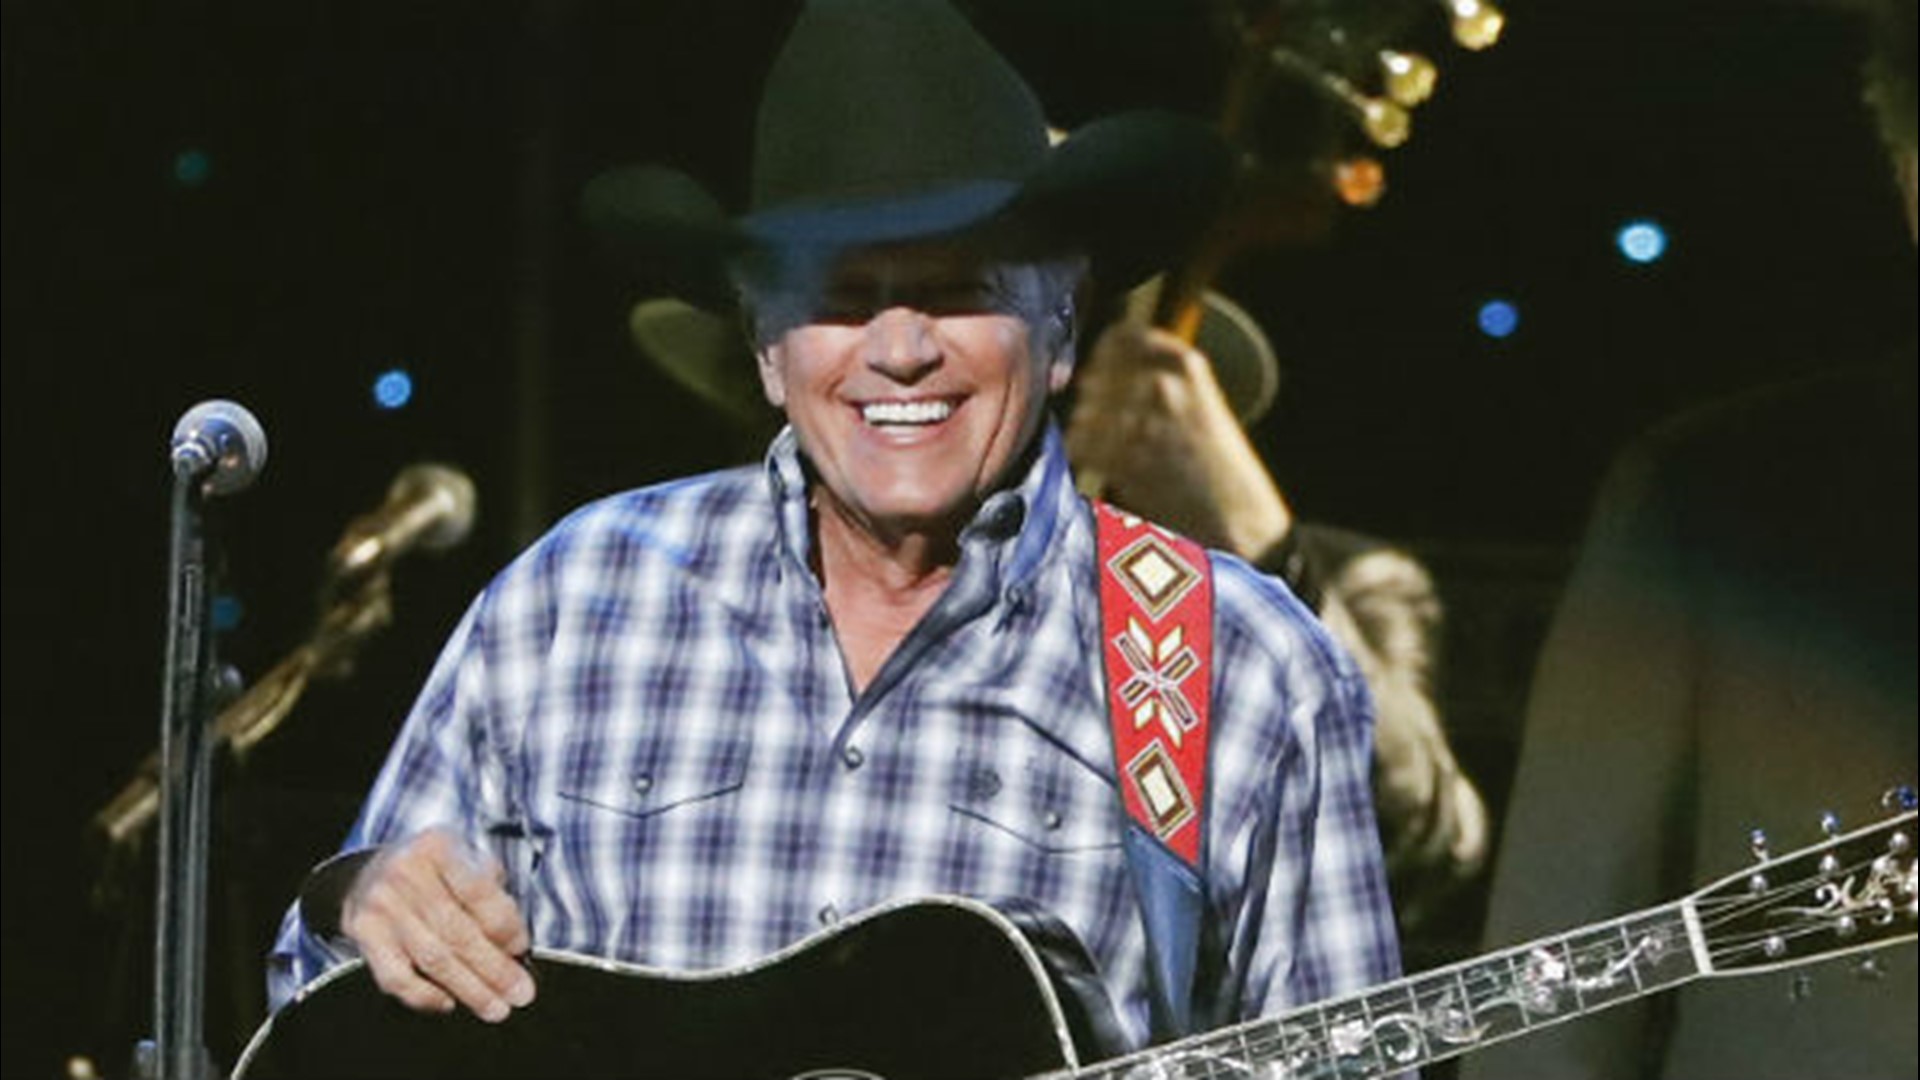 George Strait broke his own attendance record at the Houston Rodeo, Drake Bell confirmed there will be a Drake & Josh reboot, and more trending stories on the web.